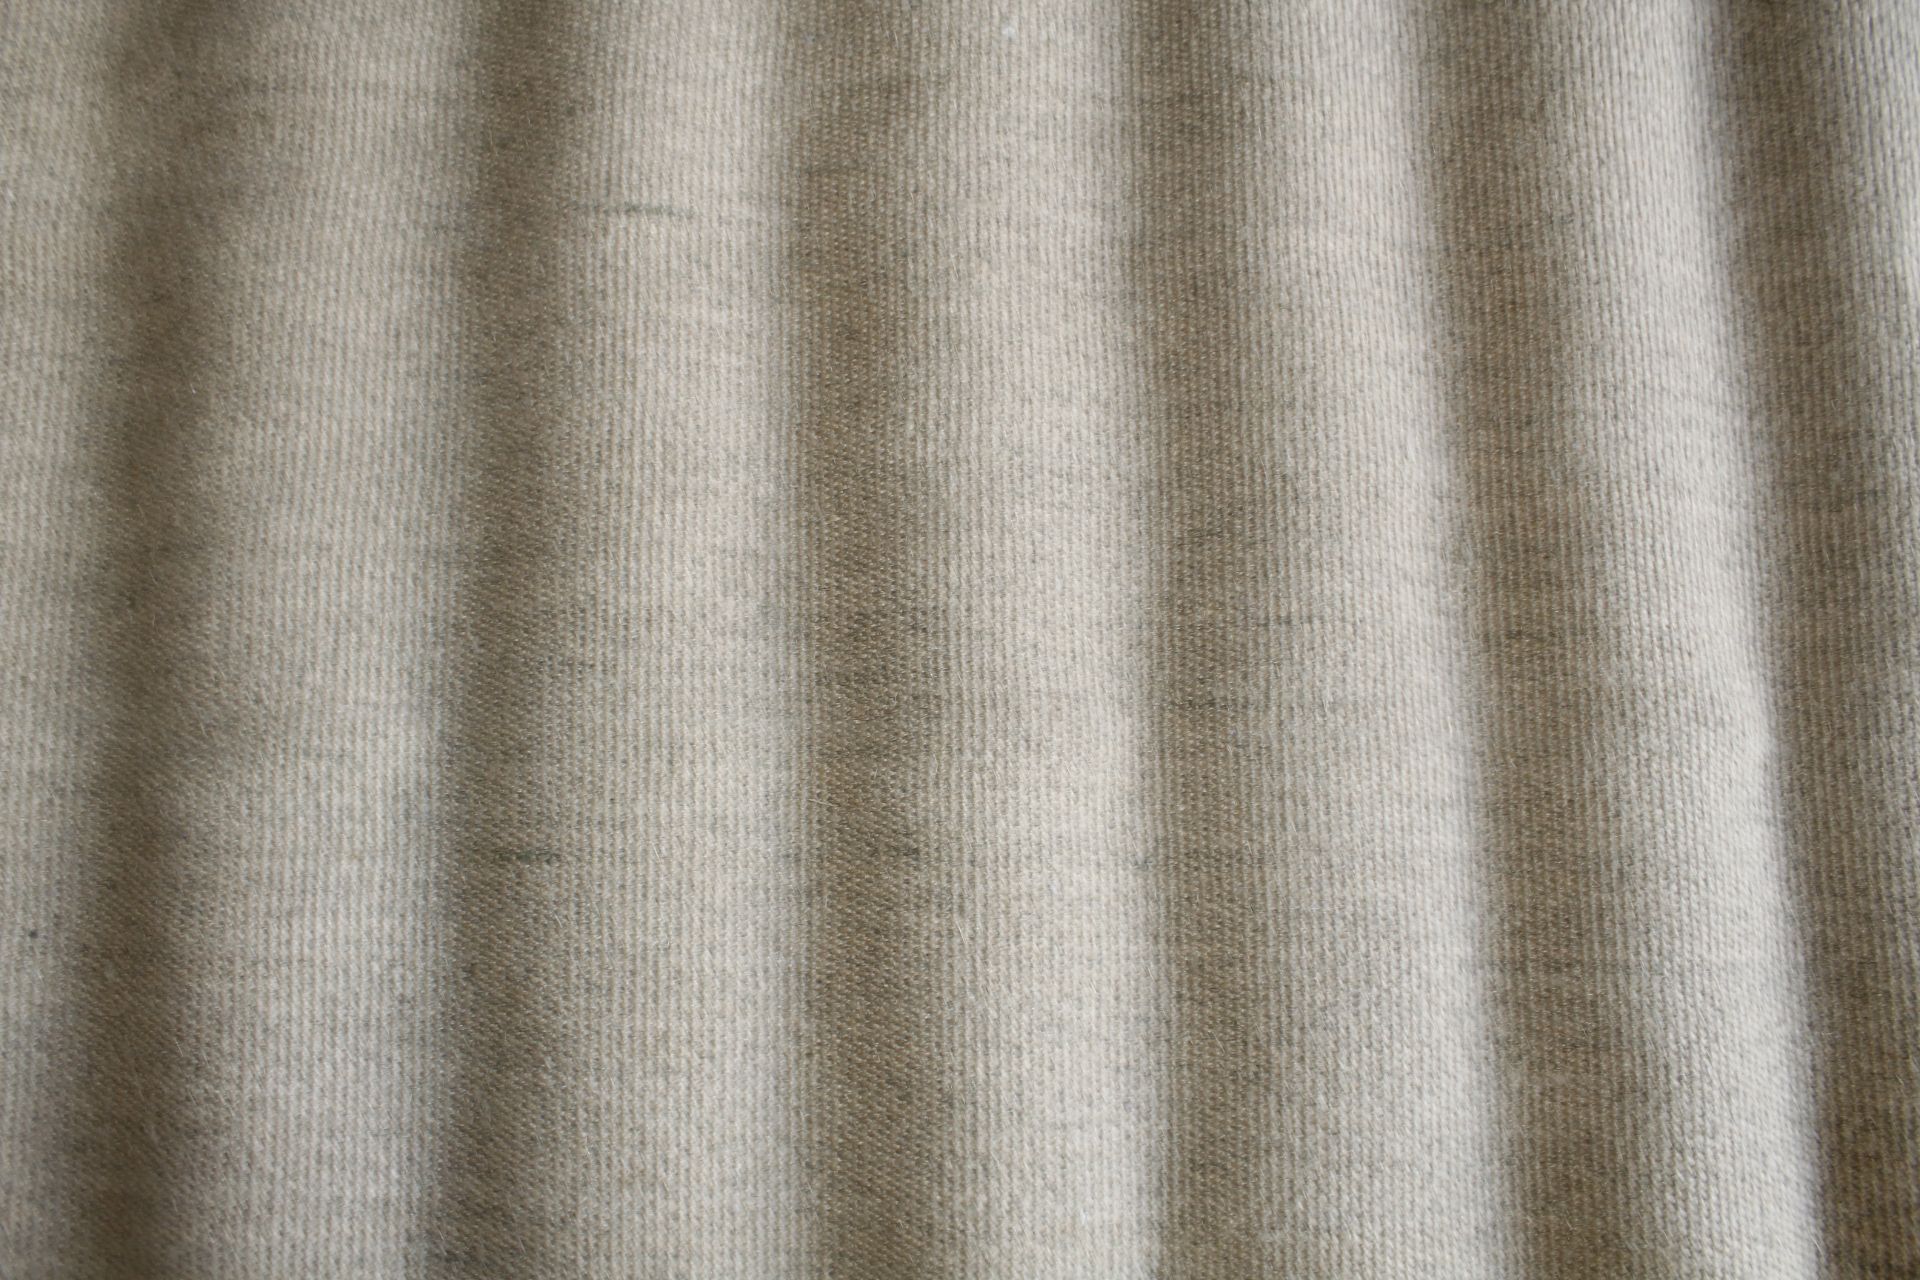 A hessian rug approx. 7'4" x 5'3" - Image 2 of 3